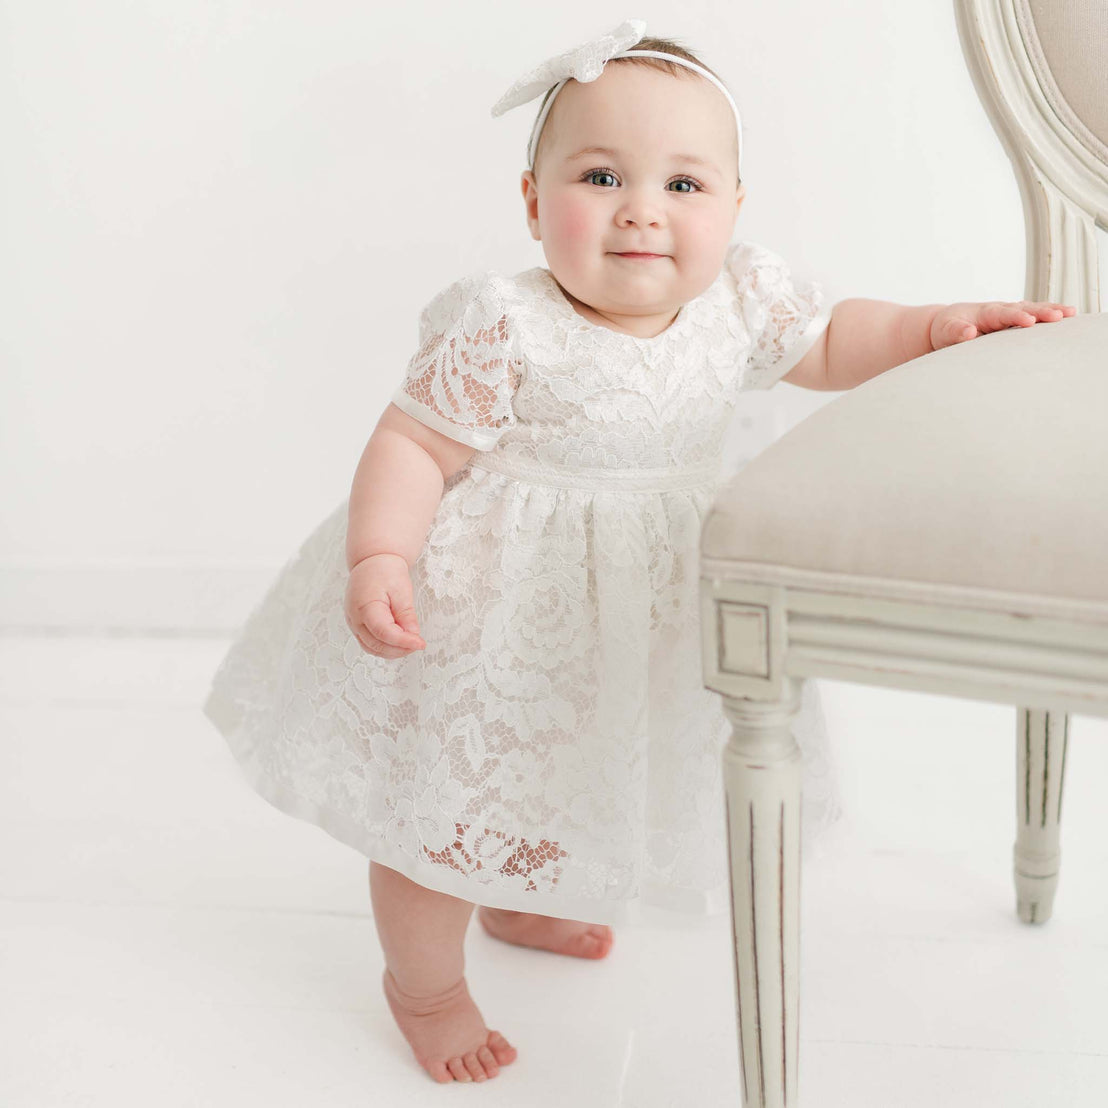 A baby girl in the Rose Romper Dress and matching Bow Headband stands barefoot, leaning on a vintage chair in a bright, white studio setting.